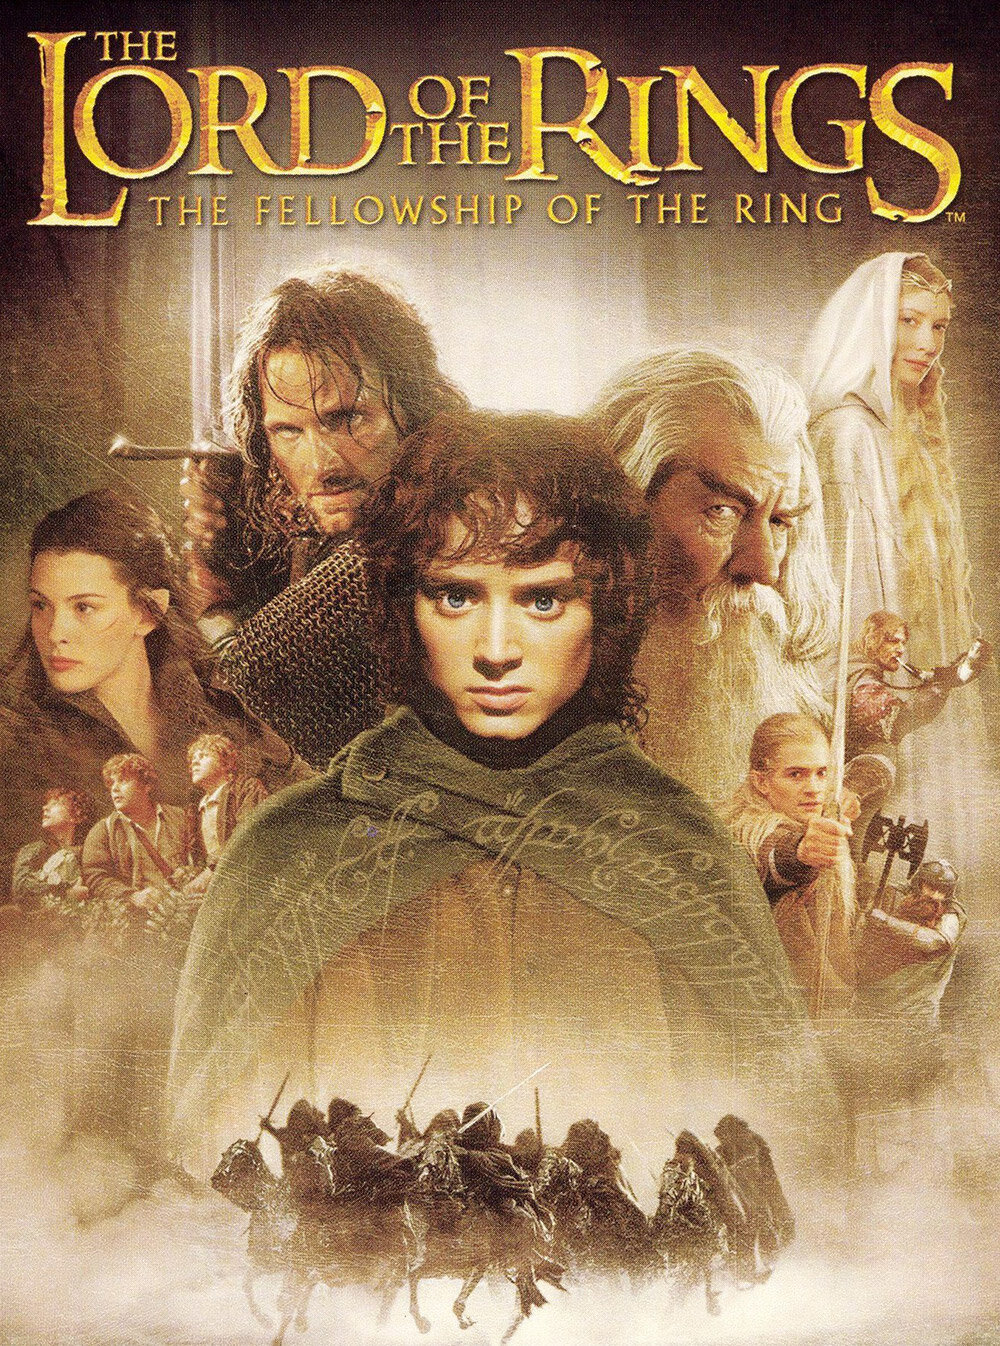 THE LORD OF THE RINGS THE FELLOWSHIP OF THE RING (EXTENDED EDITION) — Flashback Cinema